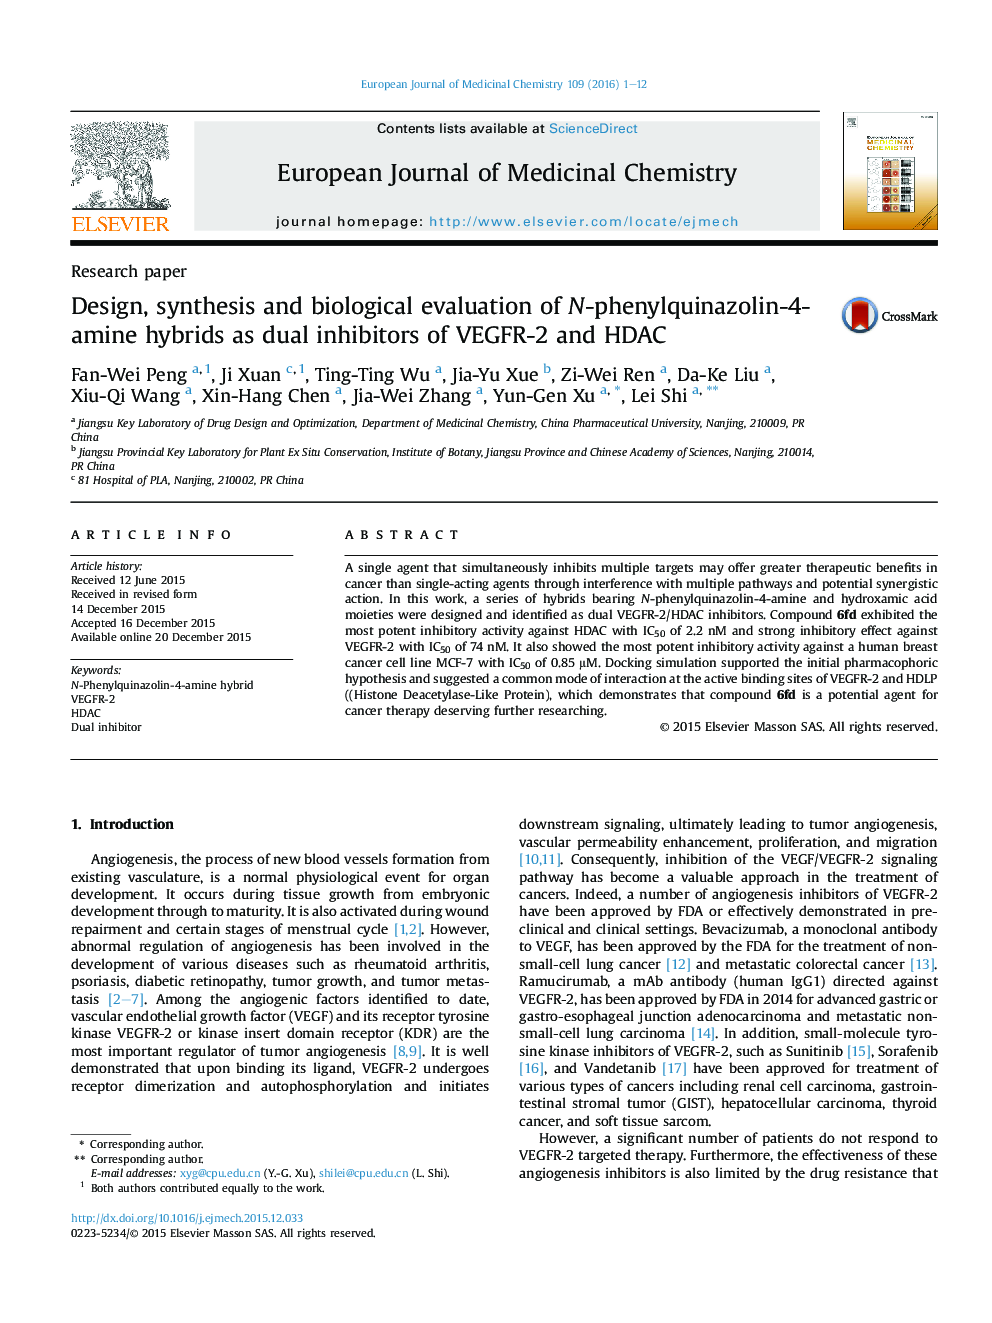 Design, synthesis and biological evaluation of N-phenylquinazolin-4-amine hybrids as dual inhibitors of VEGFR-2 and HDAC